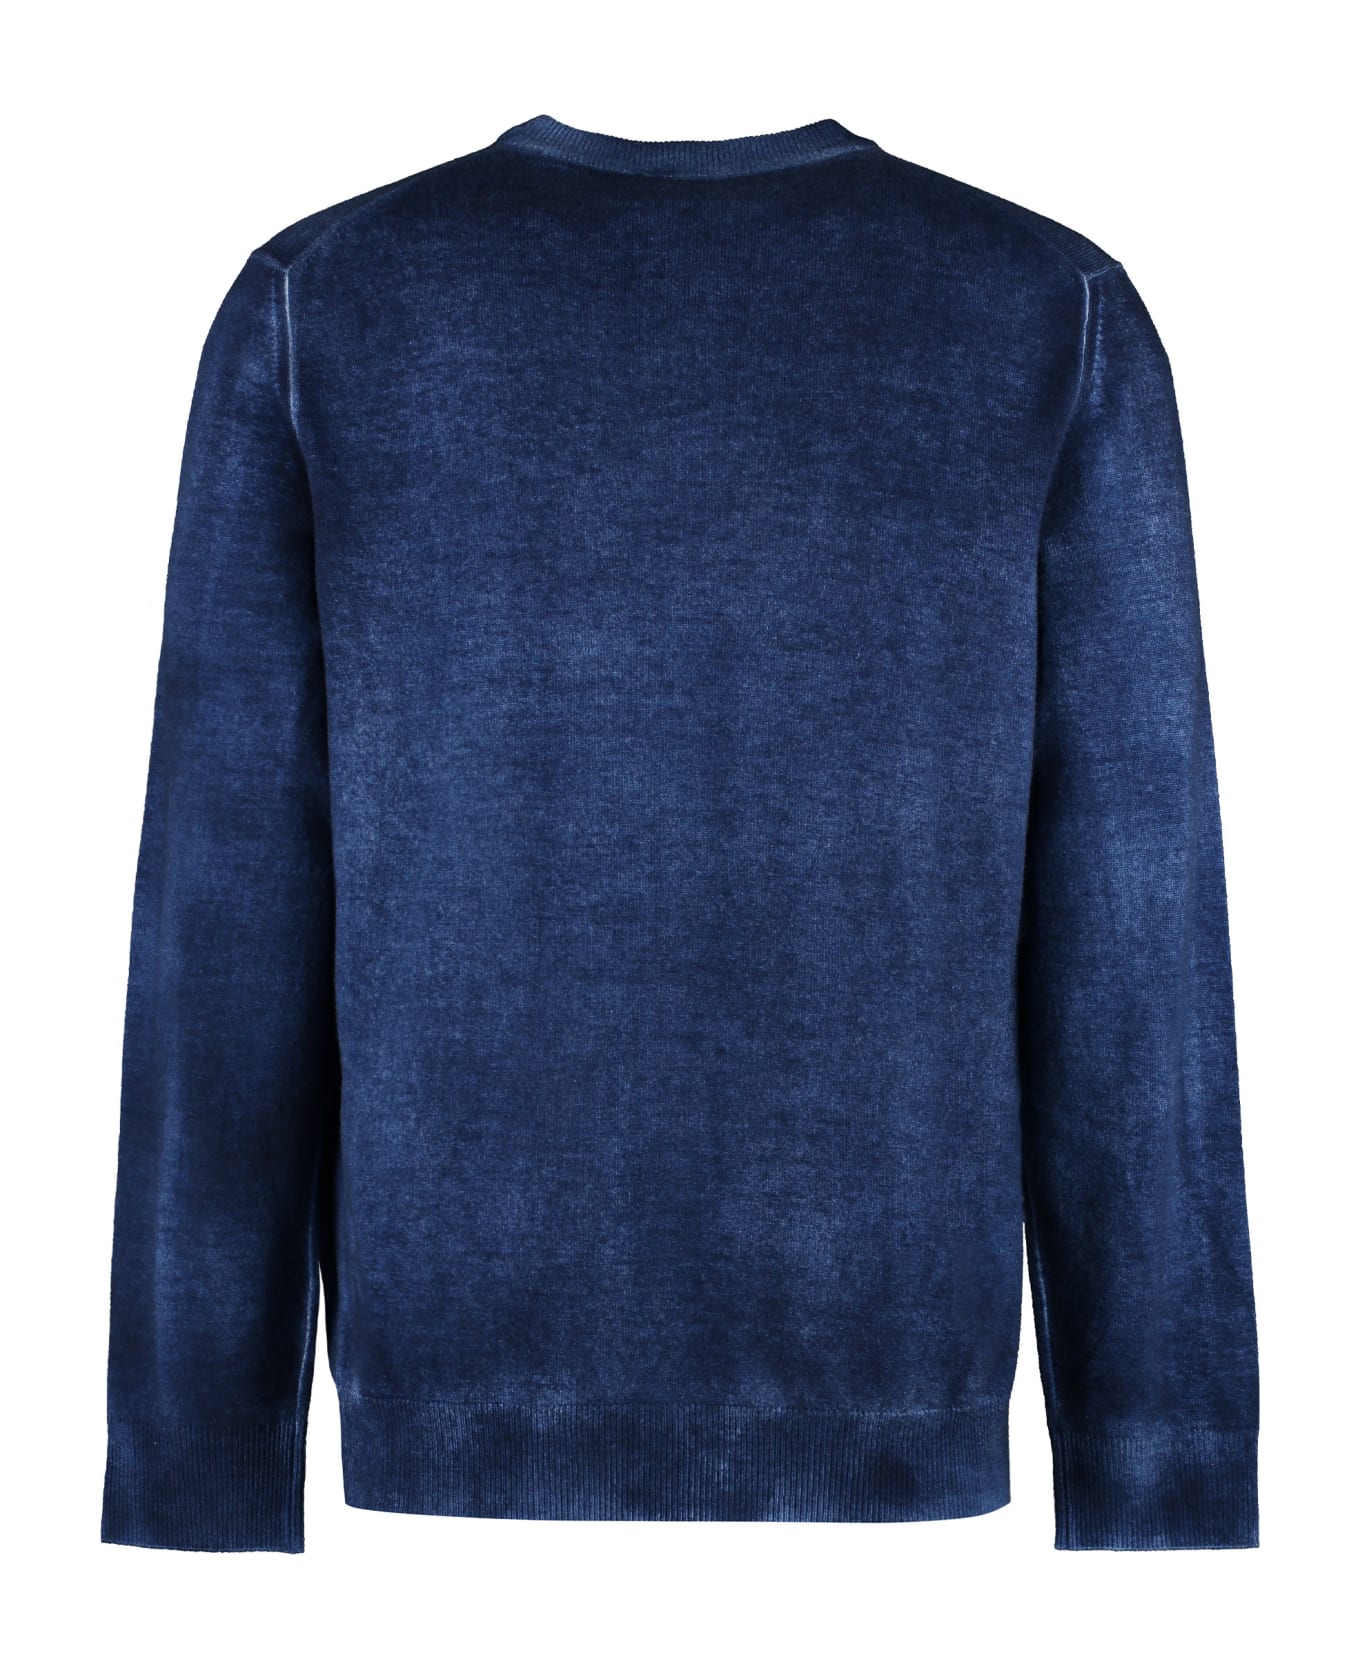 Roberto Collina Wool And Cashmere Sweater - blue